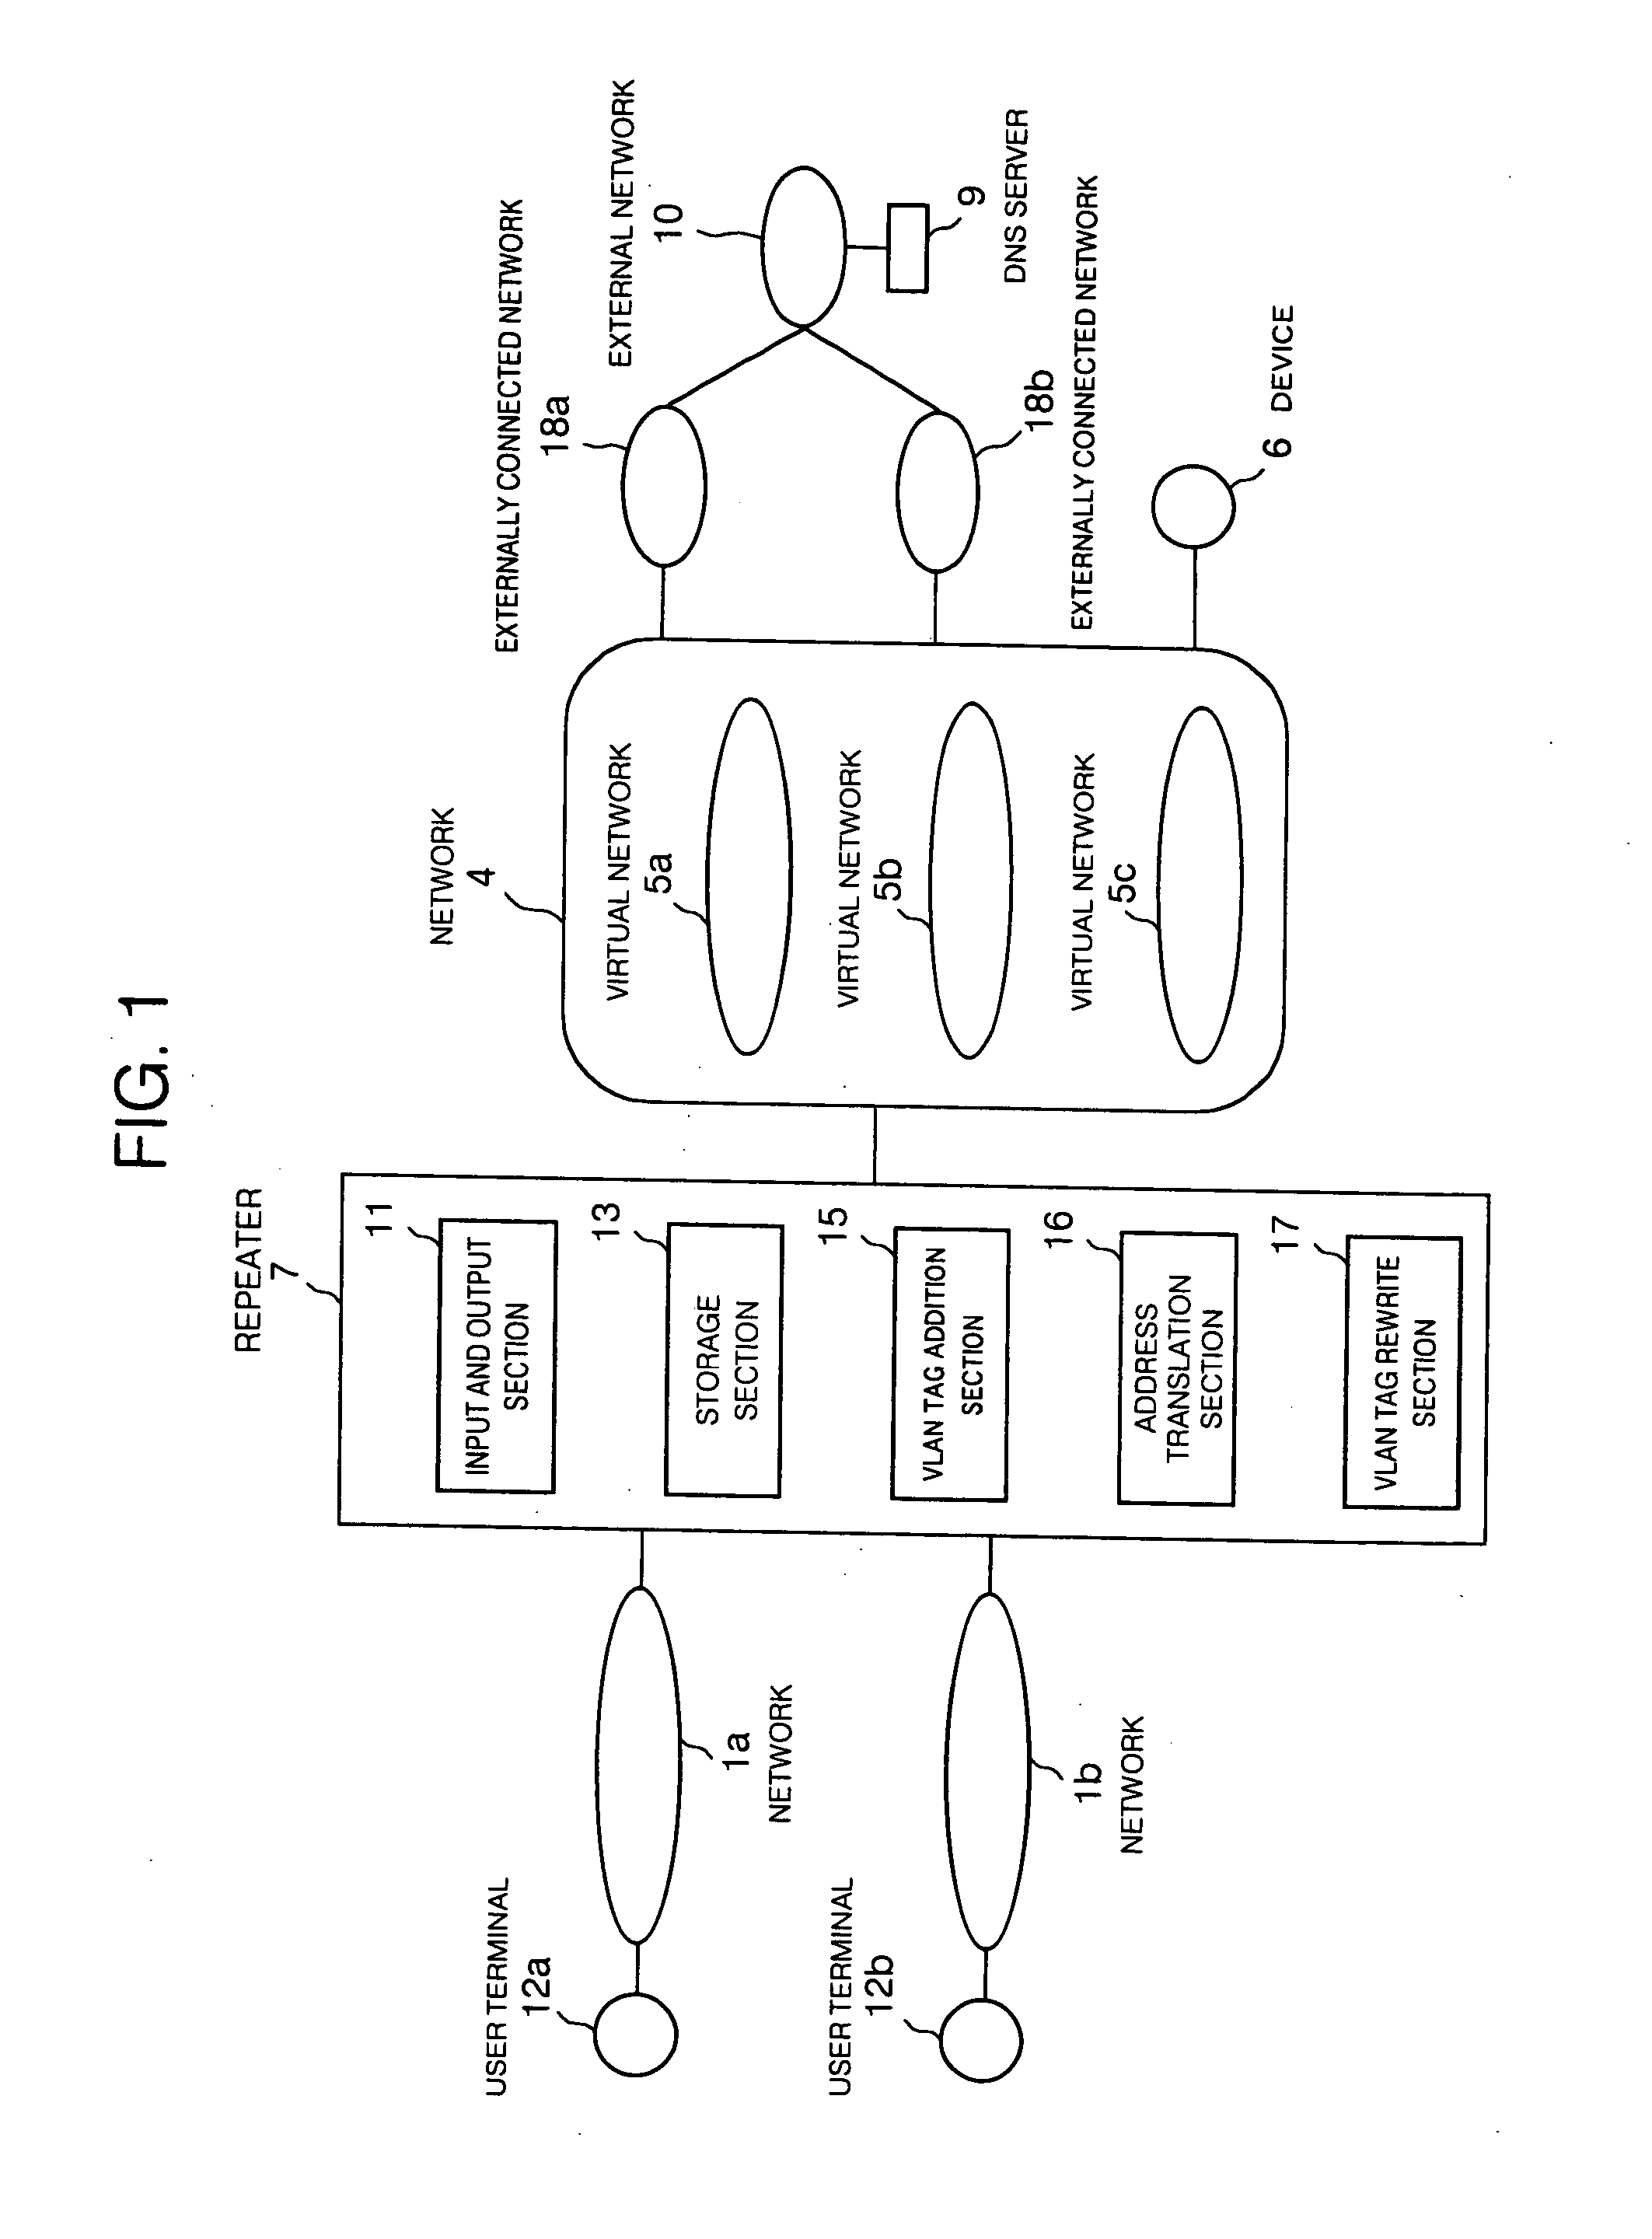 Network repeater apparatus, network repeater method and network repeater program